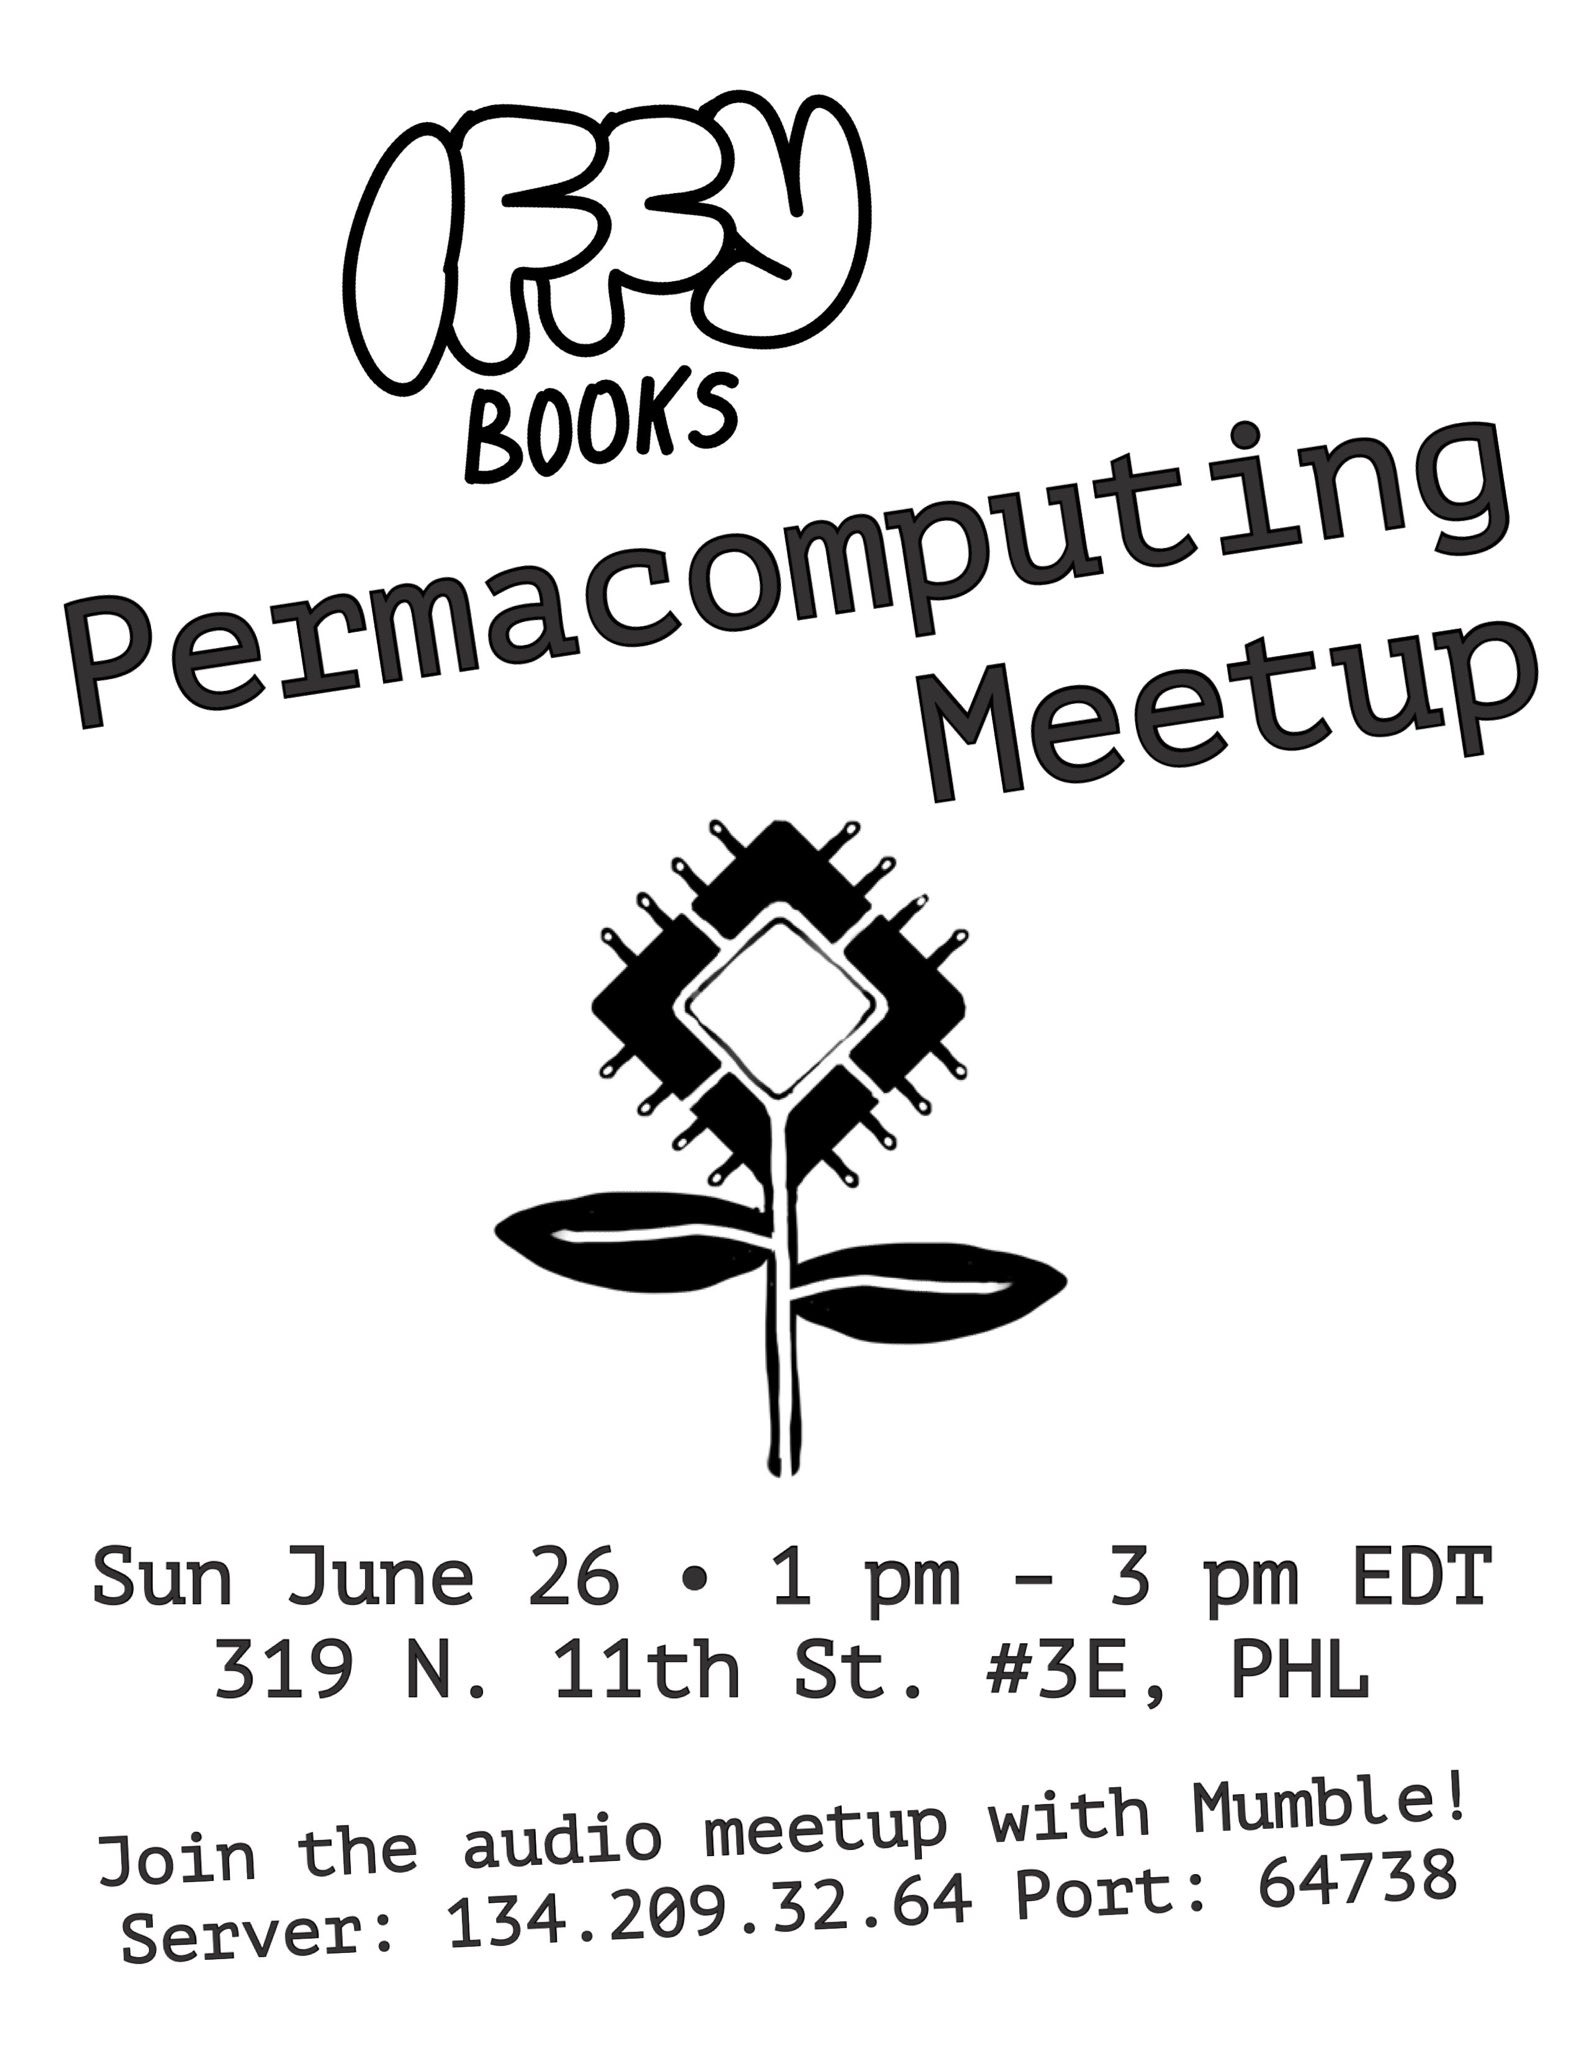 A flyer with a black & white drawing of a flower at the center, with a microchip instead of a flower head. The text reads "Iffy Books Permacomputing Meetup / Sun June 26 • 1 pm – 3 pm EDT / 319 N. 11th St. #3E, PHL / Join the audio meetup with Mumble! Server: 134.209.32.64 Port: 64738"